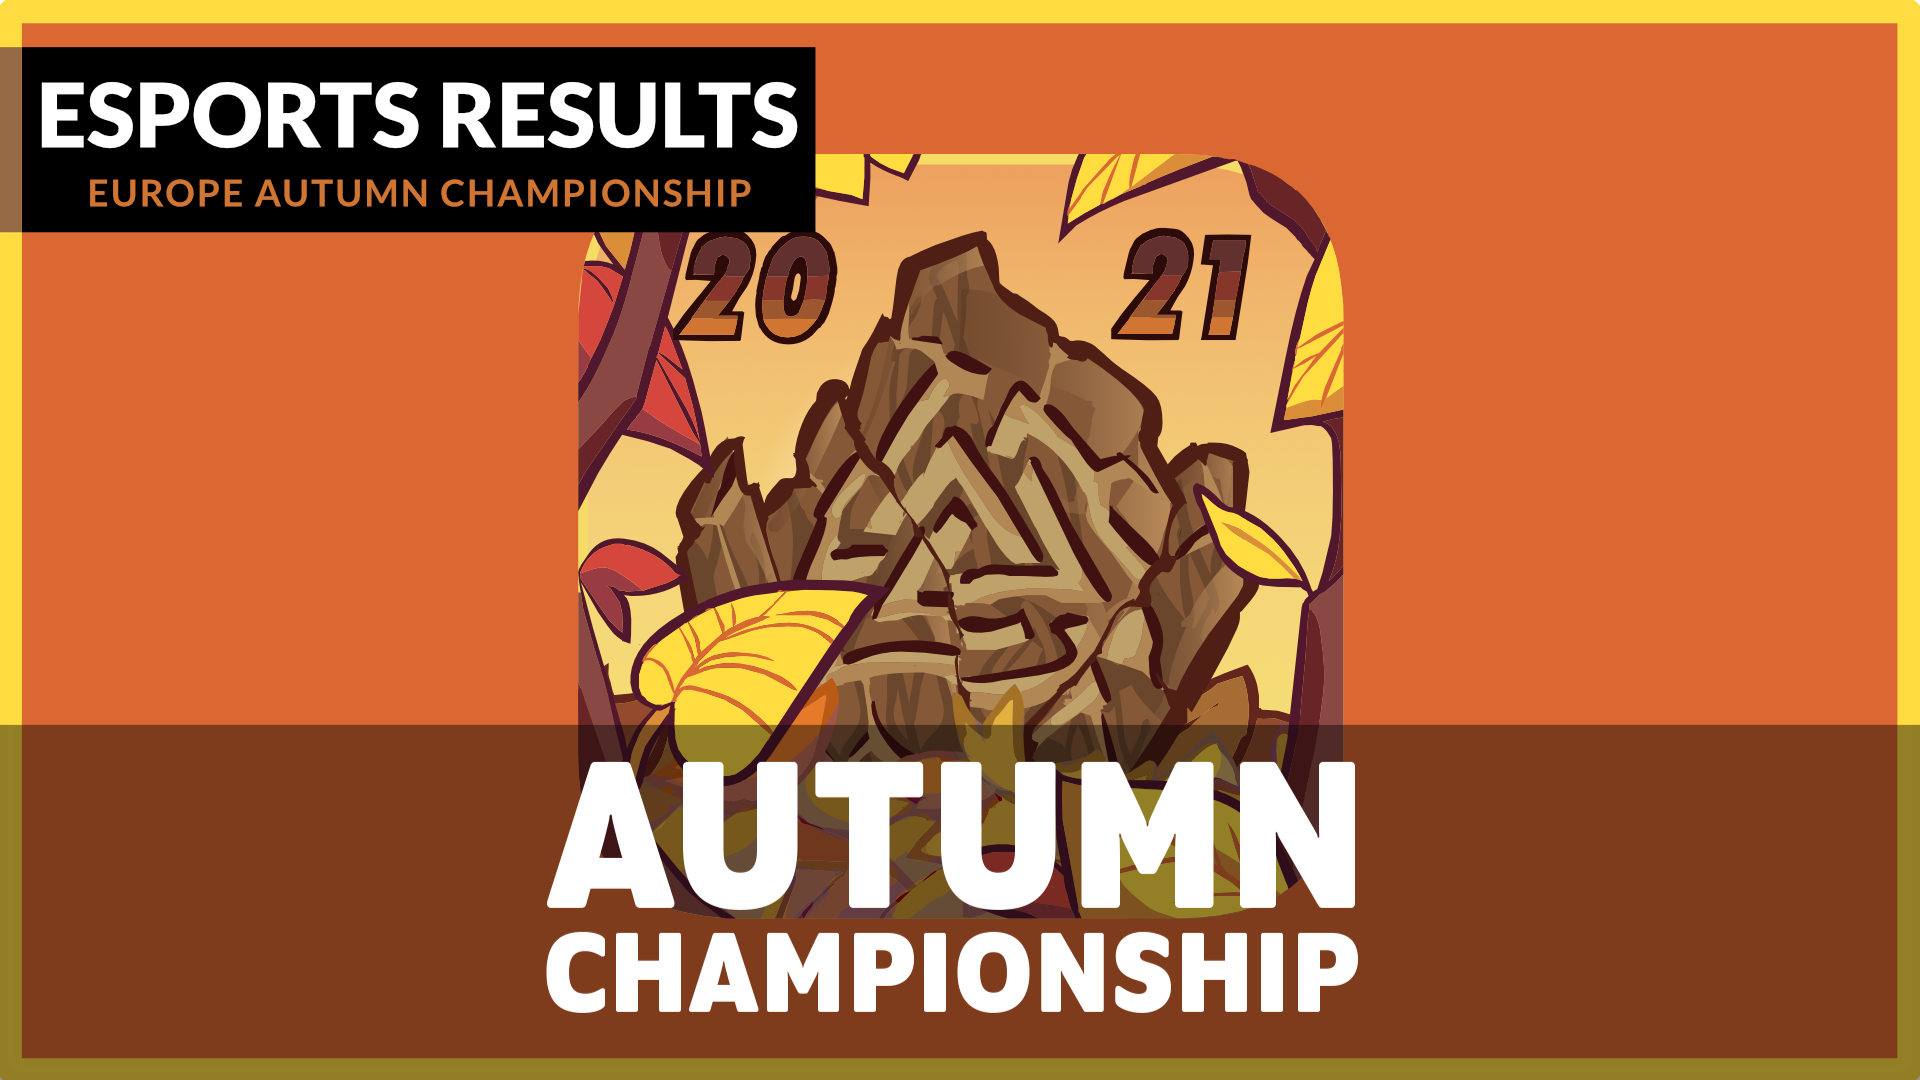 Acno takes the EU Autumn Championship in singles and in doubles with his partner Blaze!